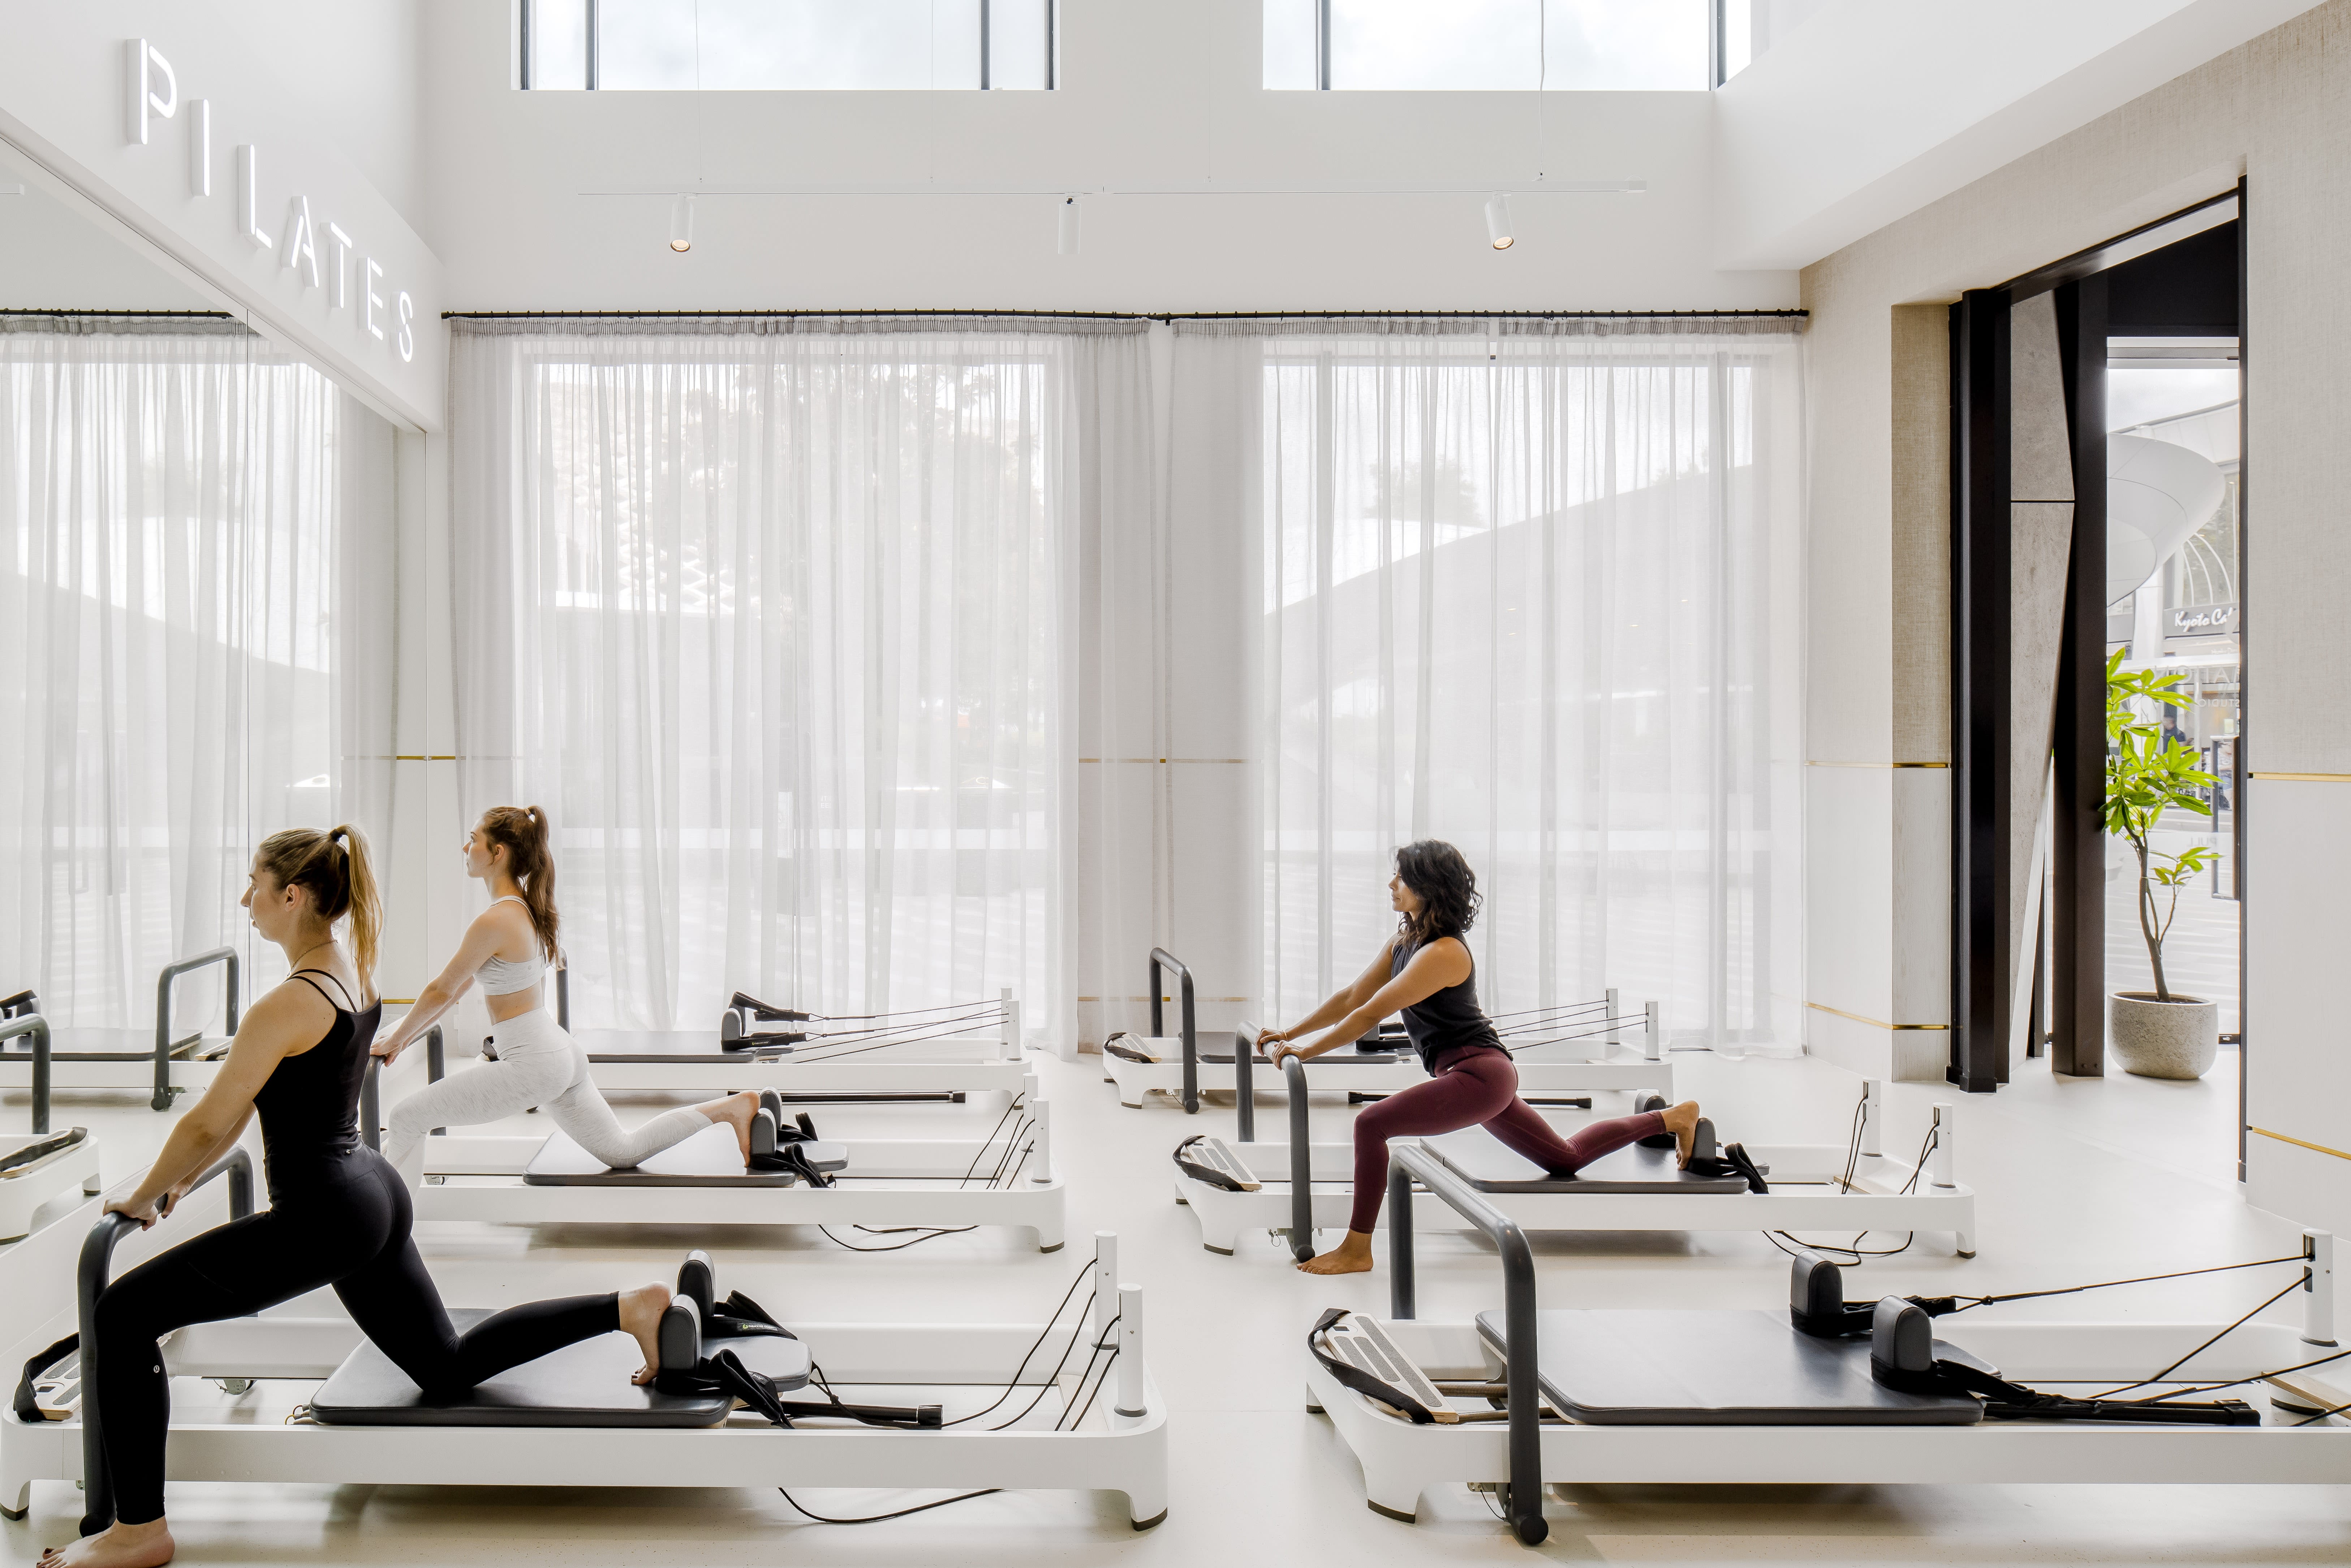 Natural Pilates as the Luxe: Read Reviews and Book Classes on ClassPass